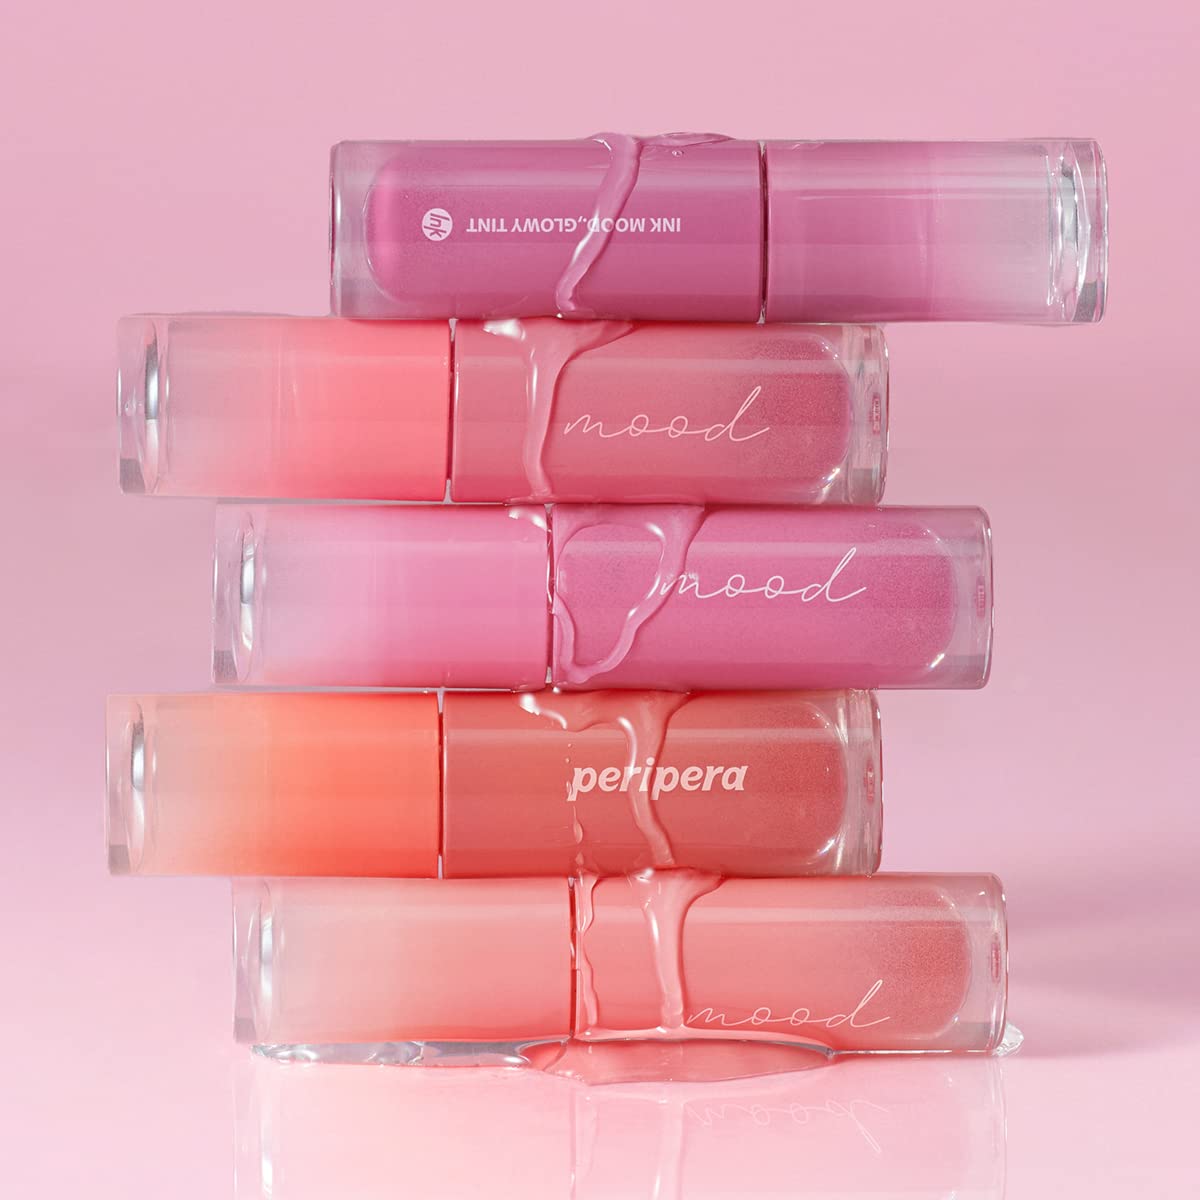 Peripera Ink Mood Glowy Tint | Lip-Plumping, Naturally Moisturizing, Lightweight, Glow-Boosting, Long-Lasting, Comfortable, Non-Sticky, Mask Friendly, No White Film (04 PINK YOUTH)